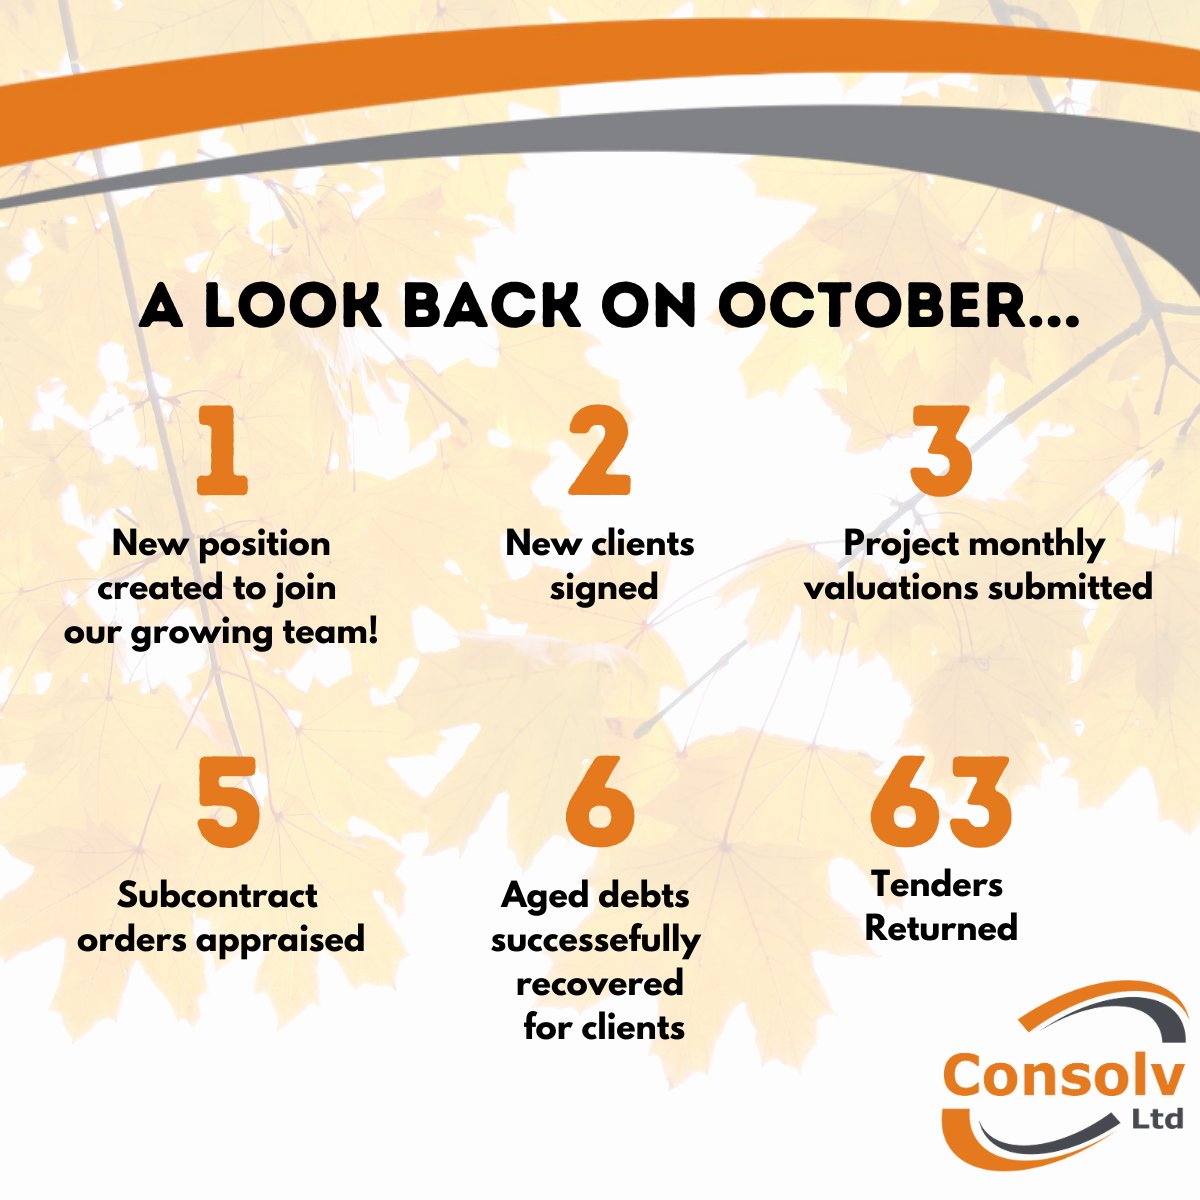 It has been a very busy few months here at Consolv and we want to keep you updated with what we are doing behind the scenes! 
Contact us at enquiries@consolv.co.uk to speak to one of the team about your project
#quantitysurveying #construction #contractreview #disputeresolution